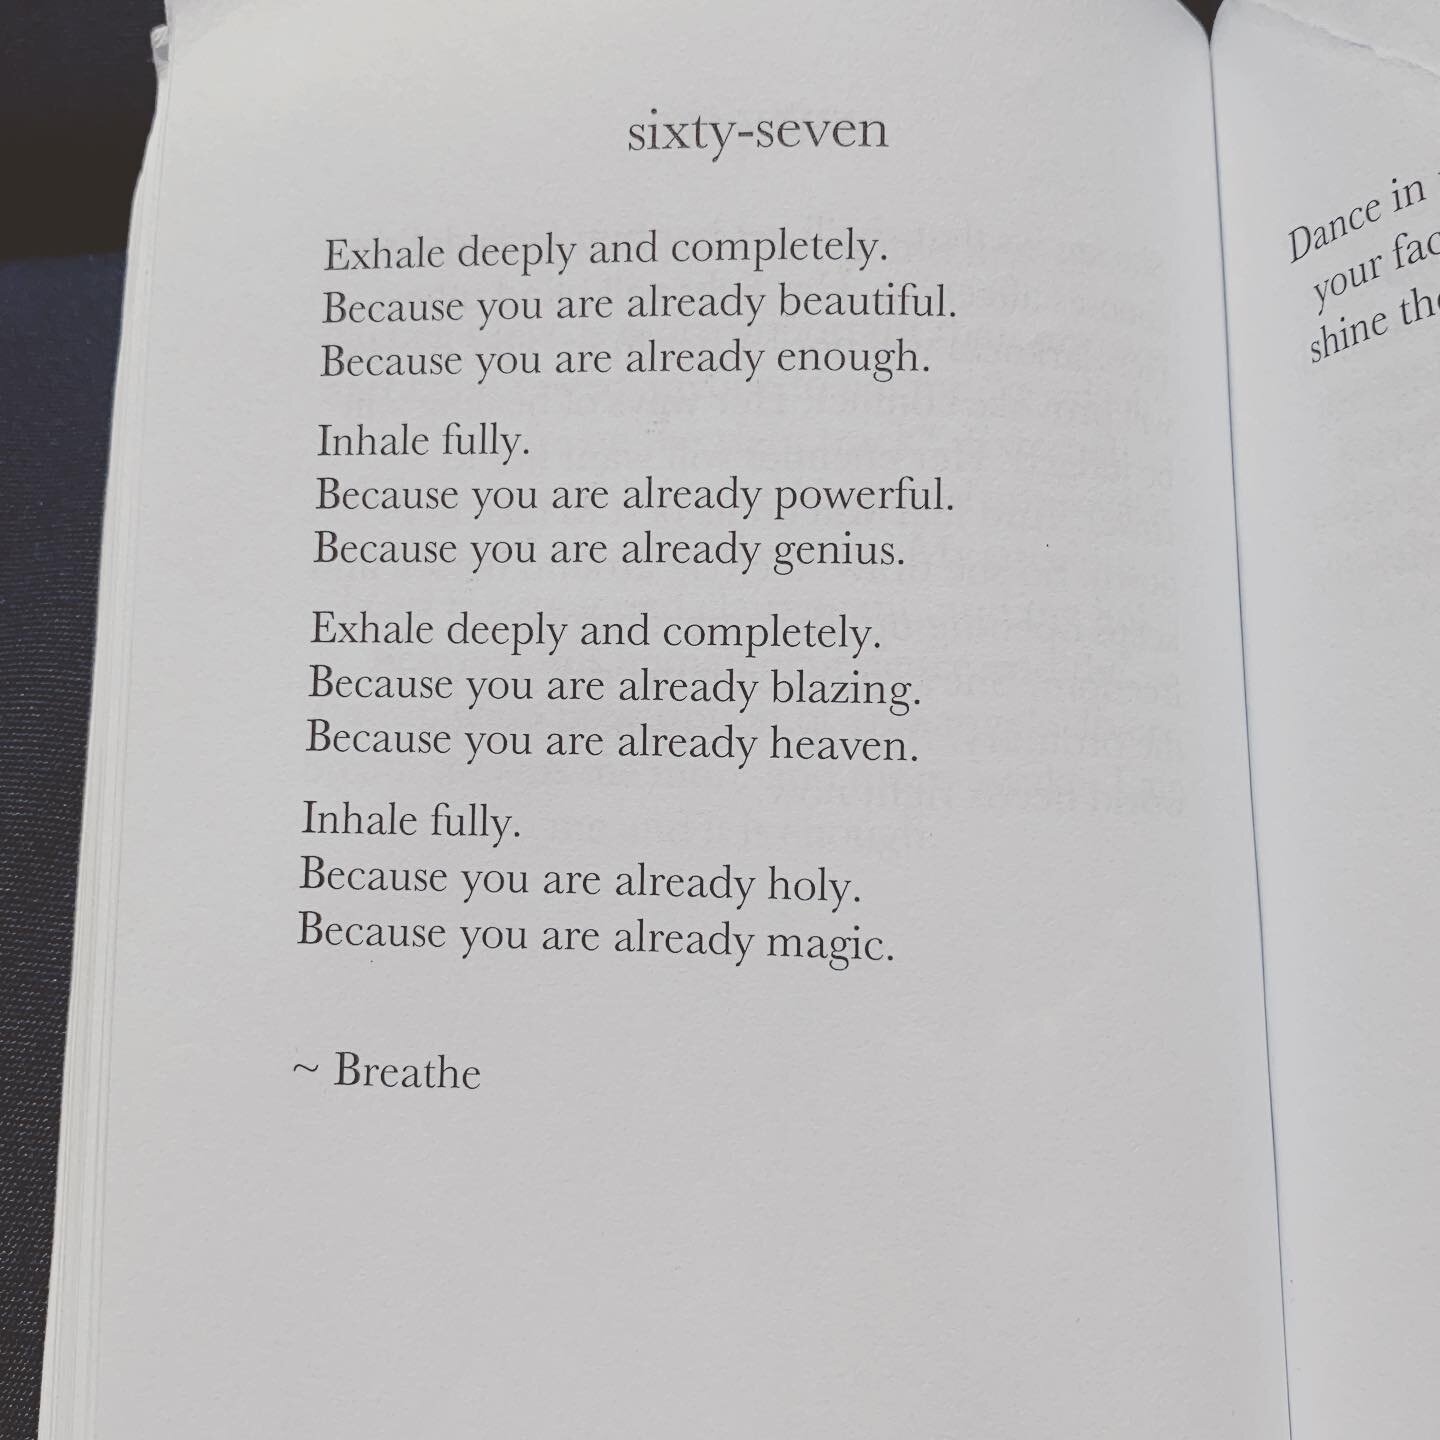 I opened to this 🧡

by @tanyamarkul from her book 

&ldquo;The She Book&rdquo;

#breathe #magic #layersyoga #dailypractice #unfolding #wisdom #beingpresent #love #yogadaily #trust #acceptyourself 

Join me daily at 9am.  Practice, breathe, dance, an